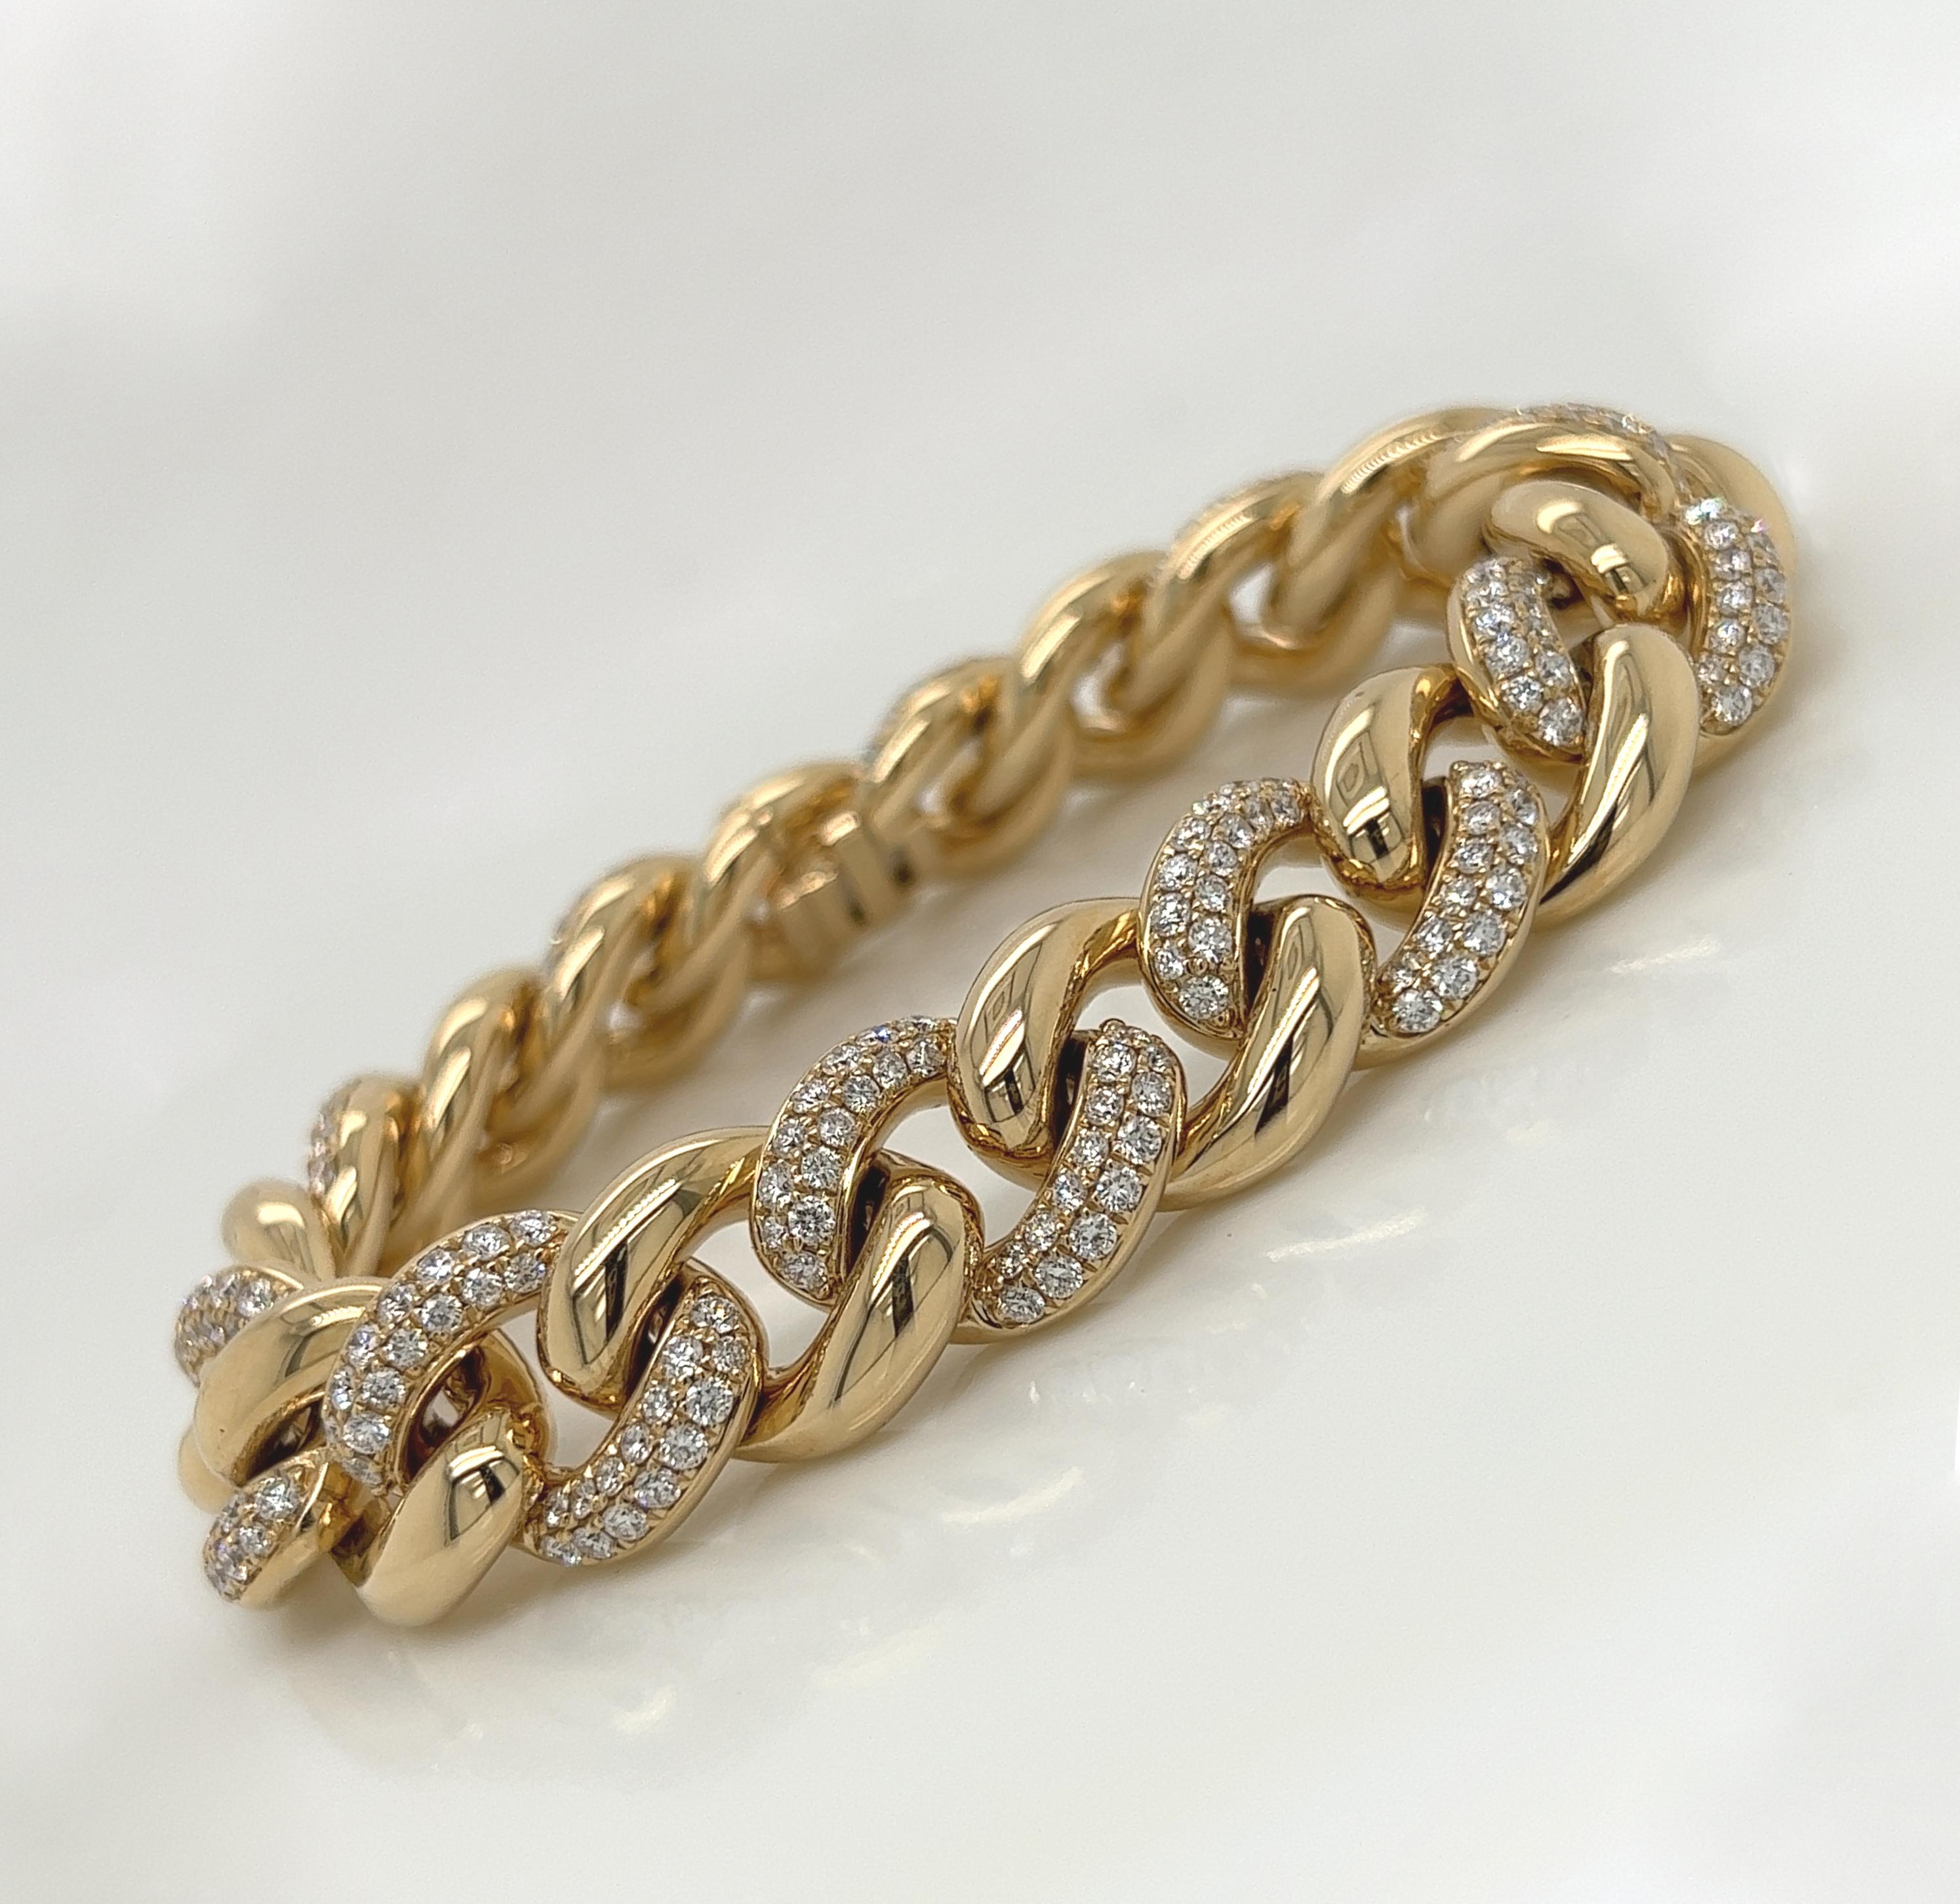 5.21 Carat 14K Yellow Gold Iced Out Cuban Link Diamond Bracelet, 41.9g

This handmade cuban link diamond bracelet weighs 41.9 grams. It boasts a whopping 5.21 Carat of sparkling round cut white diamonds exquisitely pave set into cuban links. The